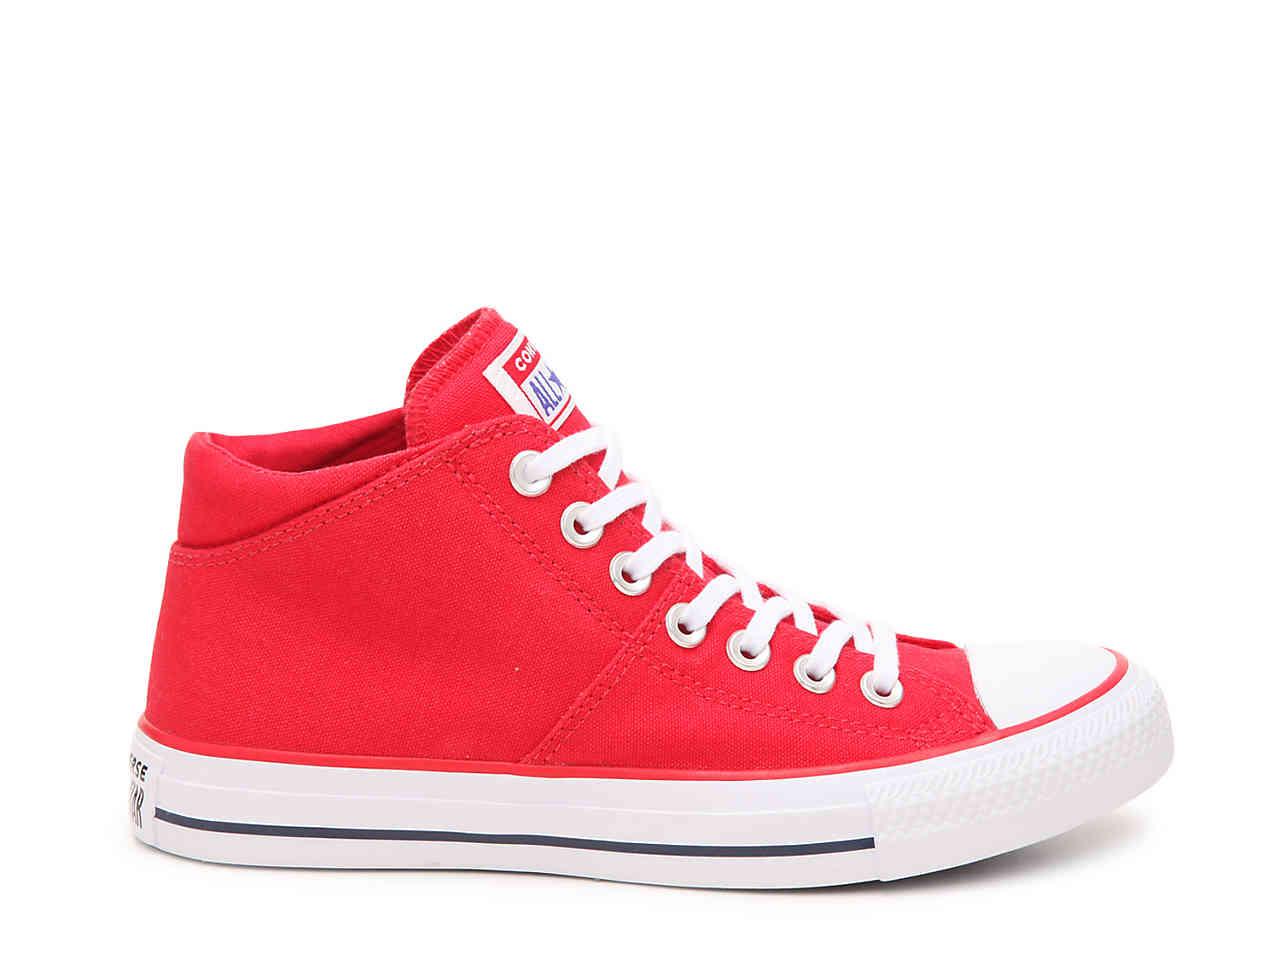 Converse Madison Mid Athletic Shoe in Red | Lyst